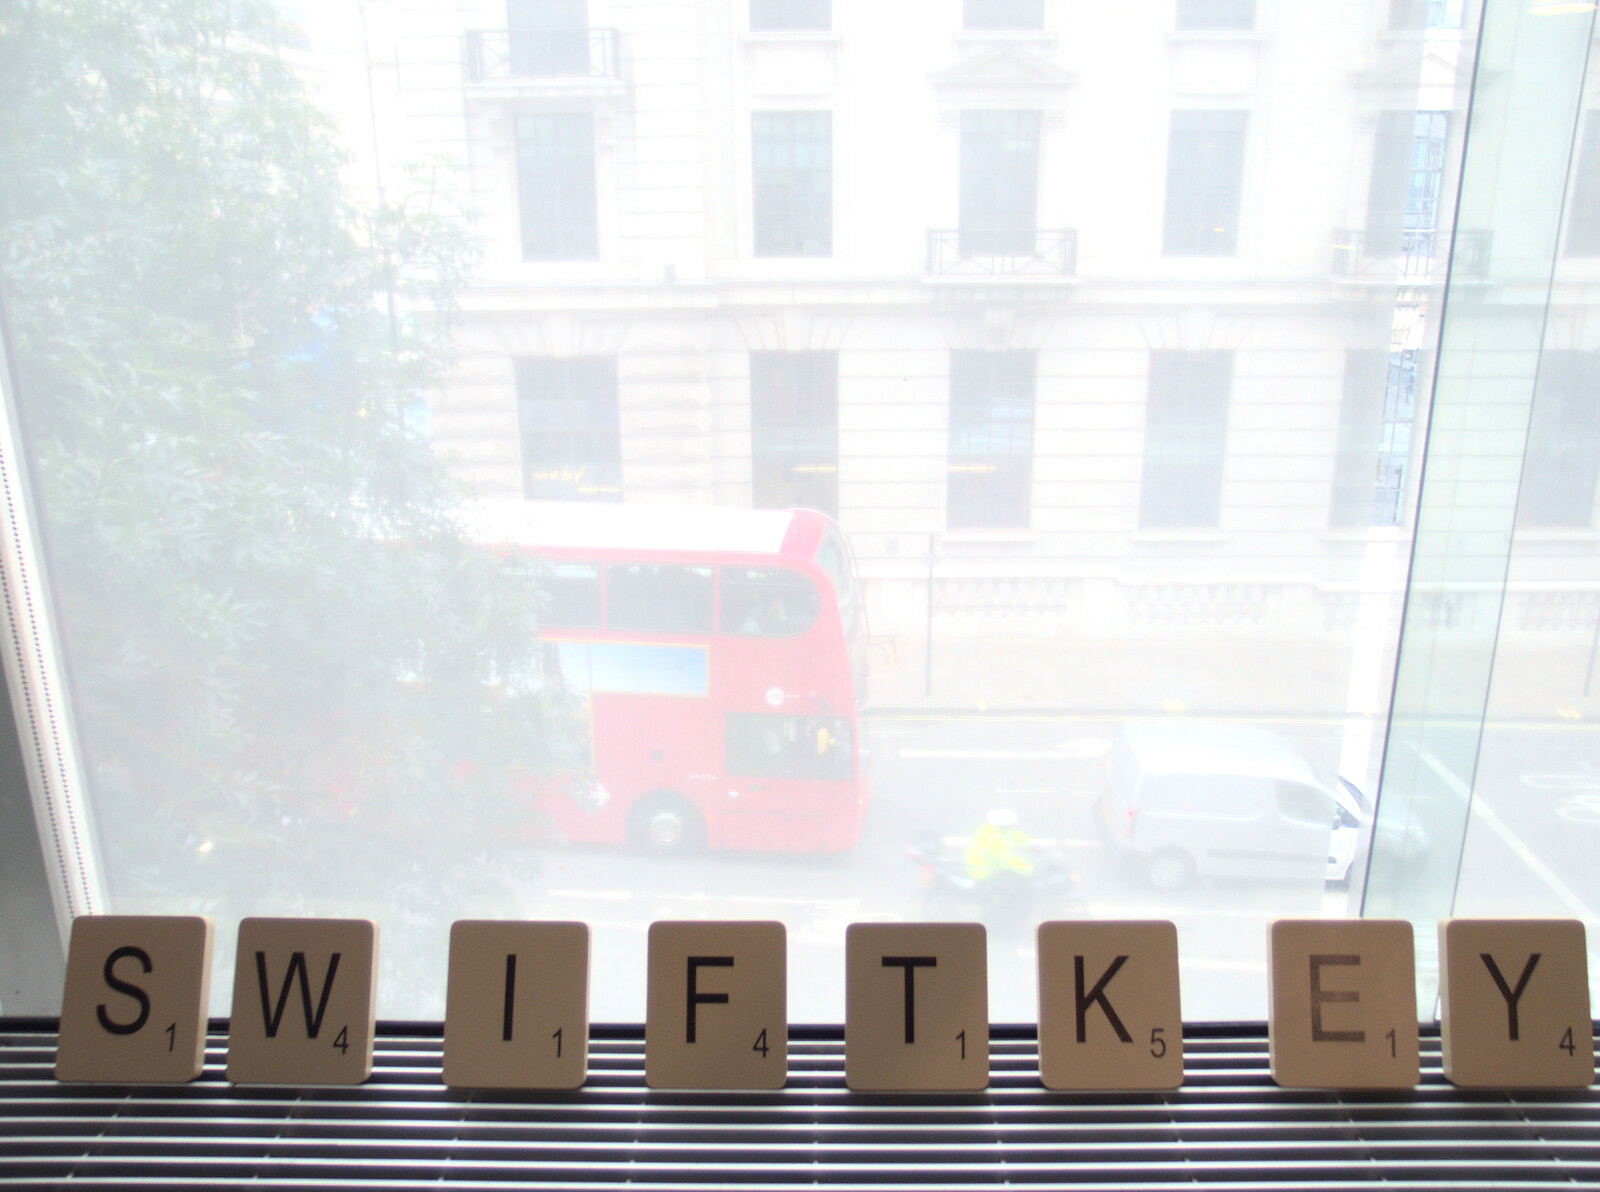 SwiftKey in scrabble form from SwiftKey Innovation Day, and Pizza Pub, Westminster and Southwark - 14th August 2014